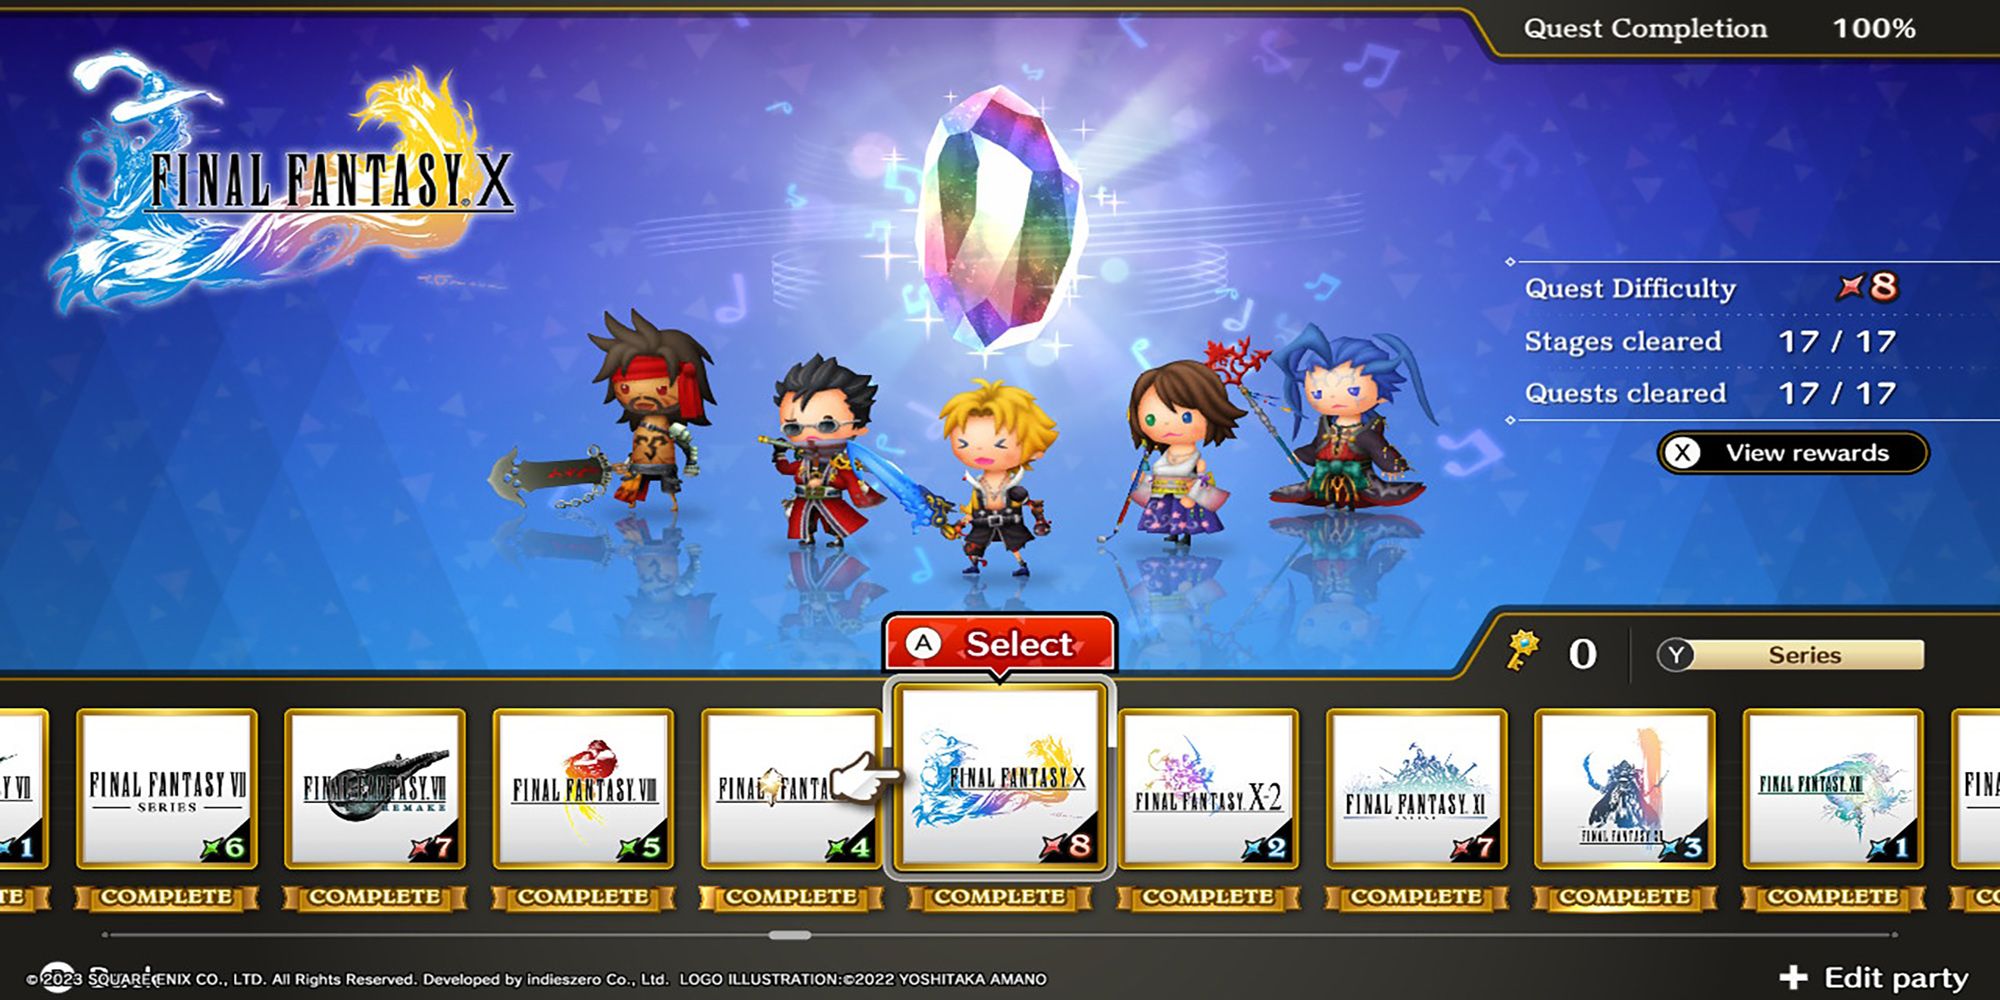 Jecht, Auron, Tidus, Yuna, and Seymour stand below a glowing Rhythmia crystal in Theatrhythm: Final Bar Line's Series Title Select Screen.